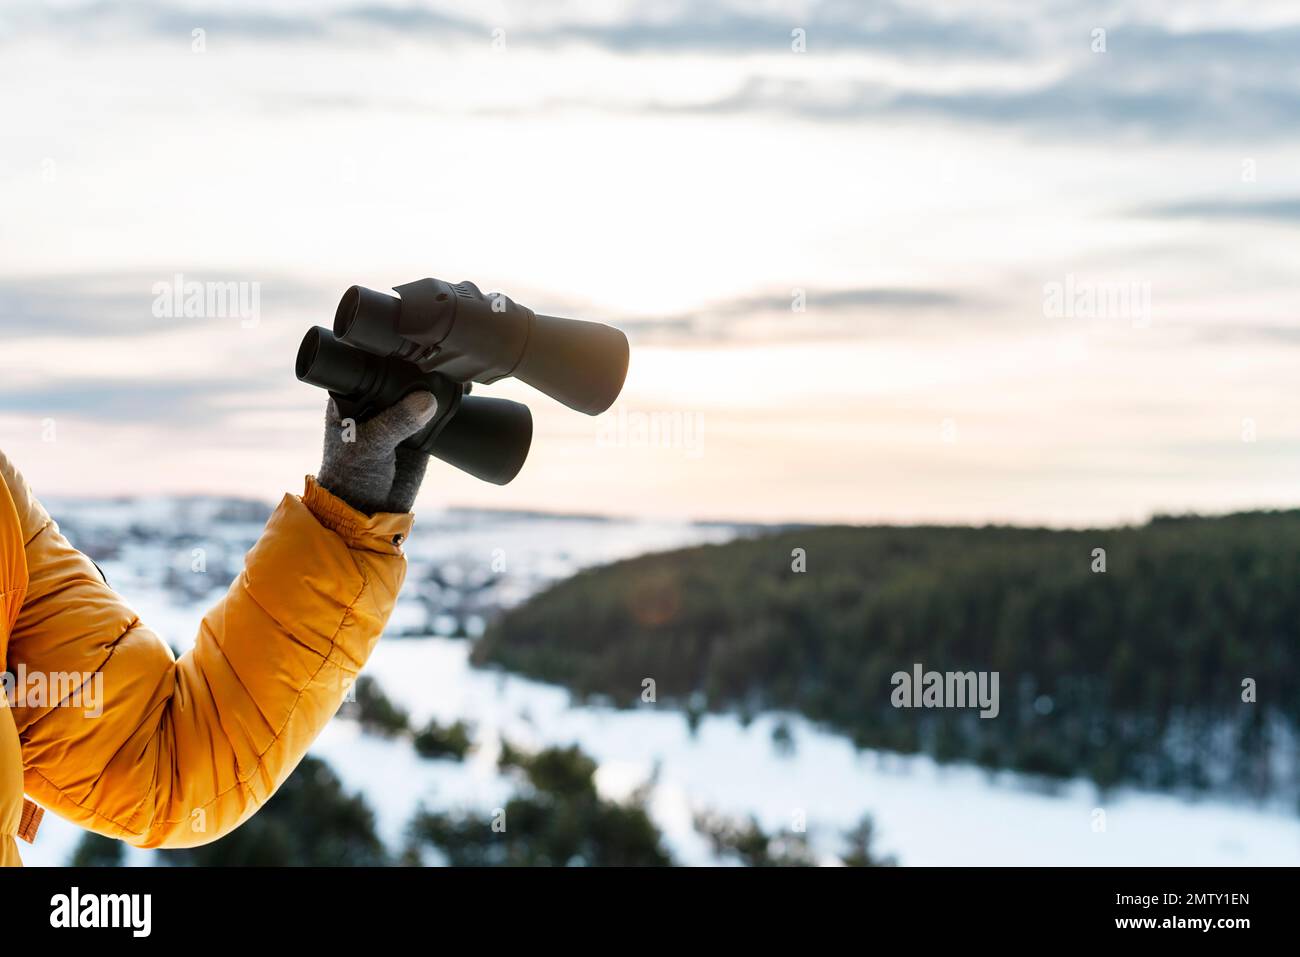 human hand in yellow jacket and warm glove holding binoculars againstwinter forest view of snowy river and sky Birdwatching ecology Research in nature Stock Photo